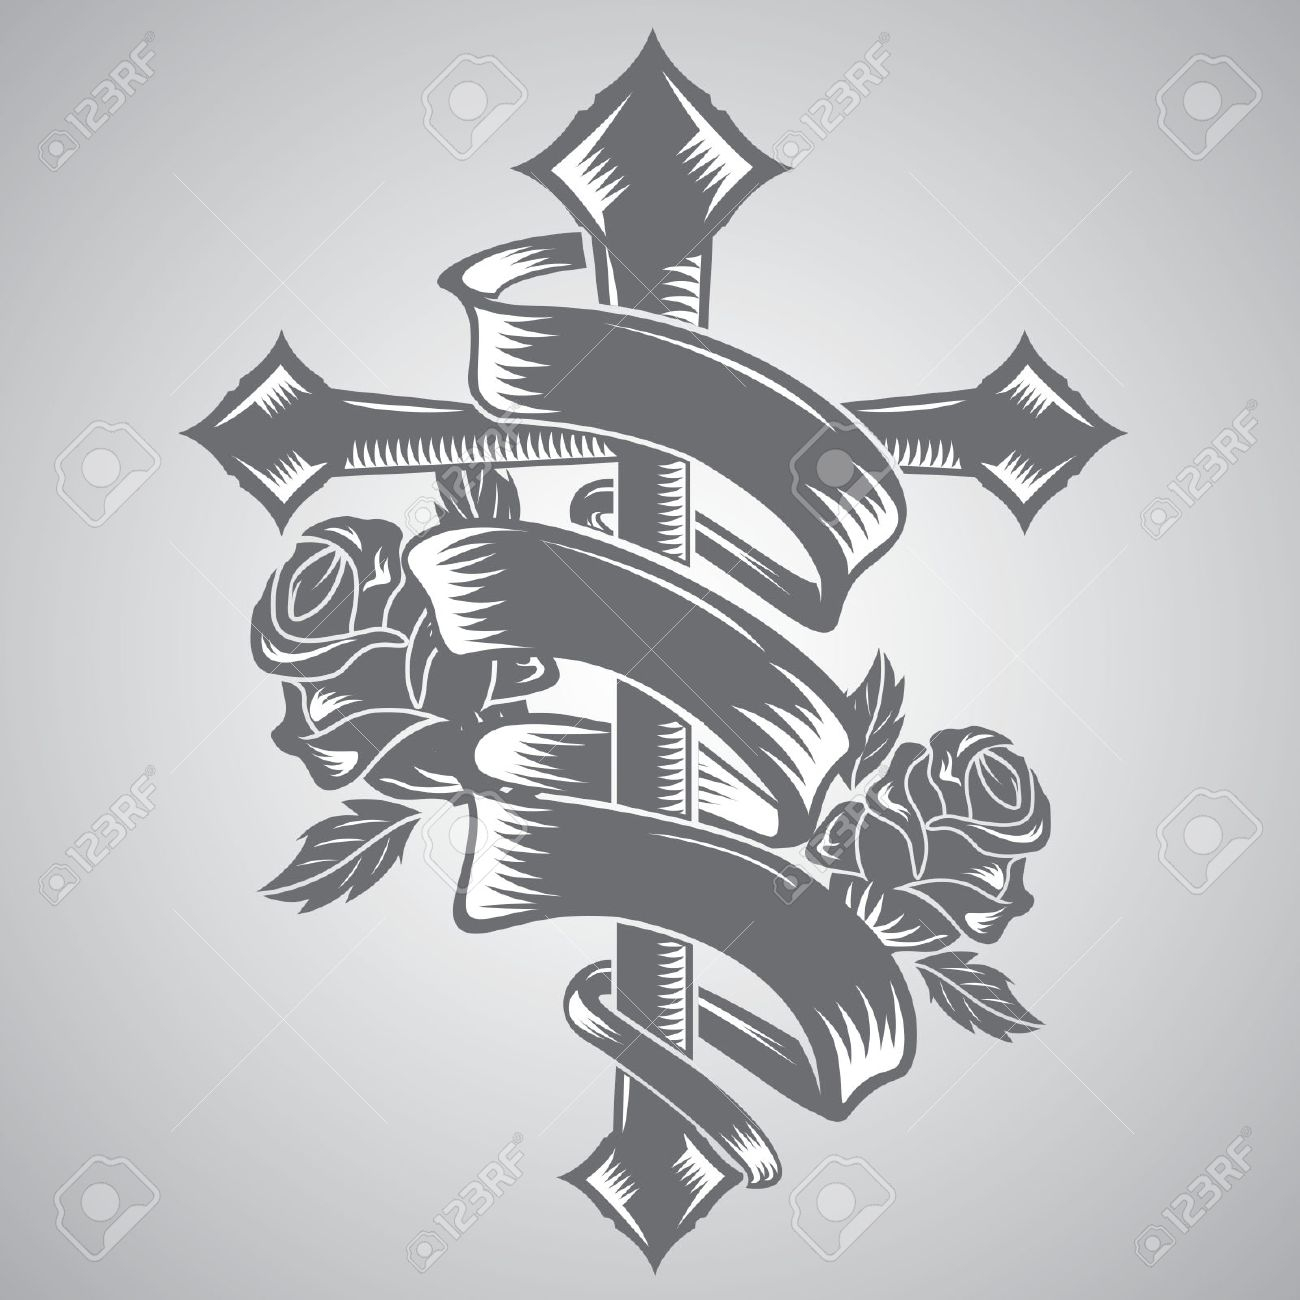 Cross With Ribbon Tattoo Vector Royalty Free Cliparts Vectors And pertaining to size 1300 X 1300